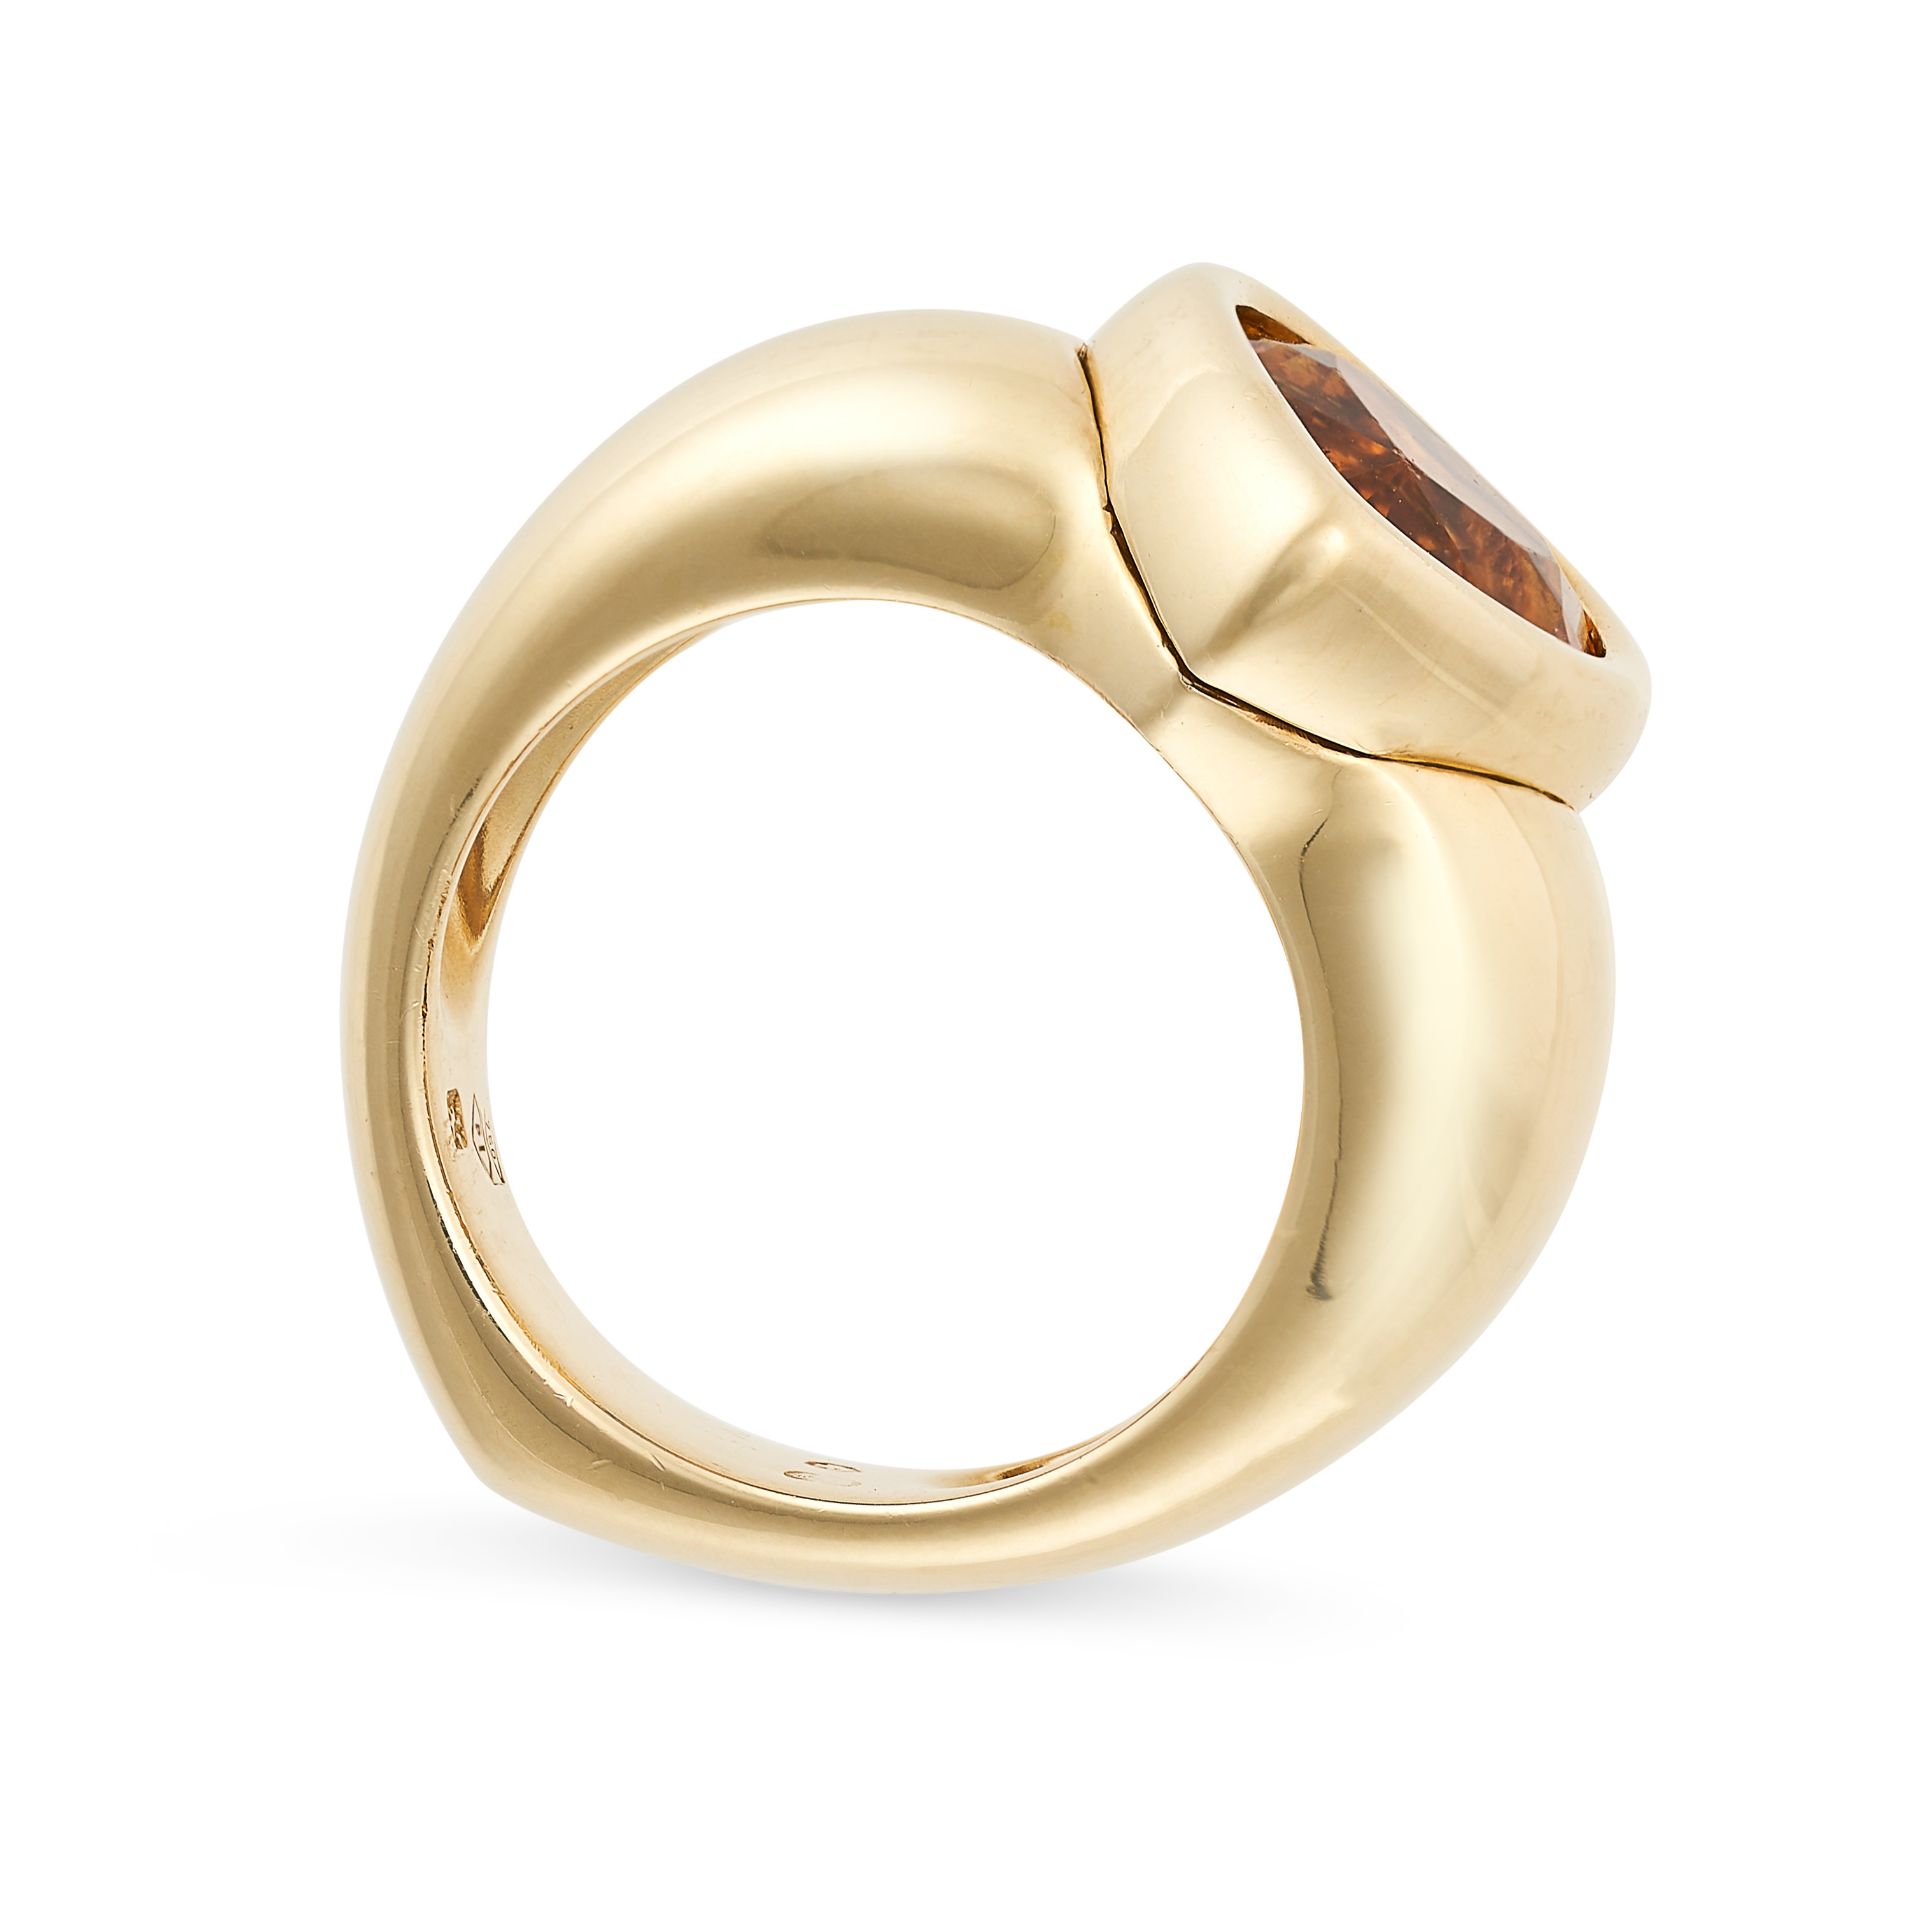 PIAGET, A CITRINE HEART RING in 18ct yellow gold, set with a heart shaped citrine, signed Piaget and - Image 2 of 2